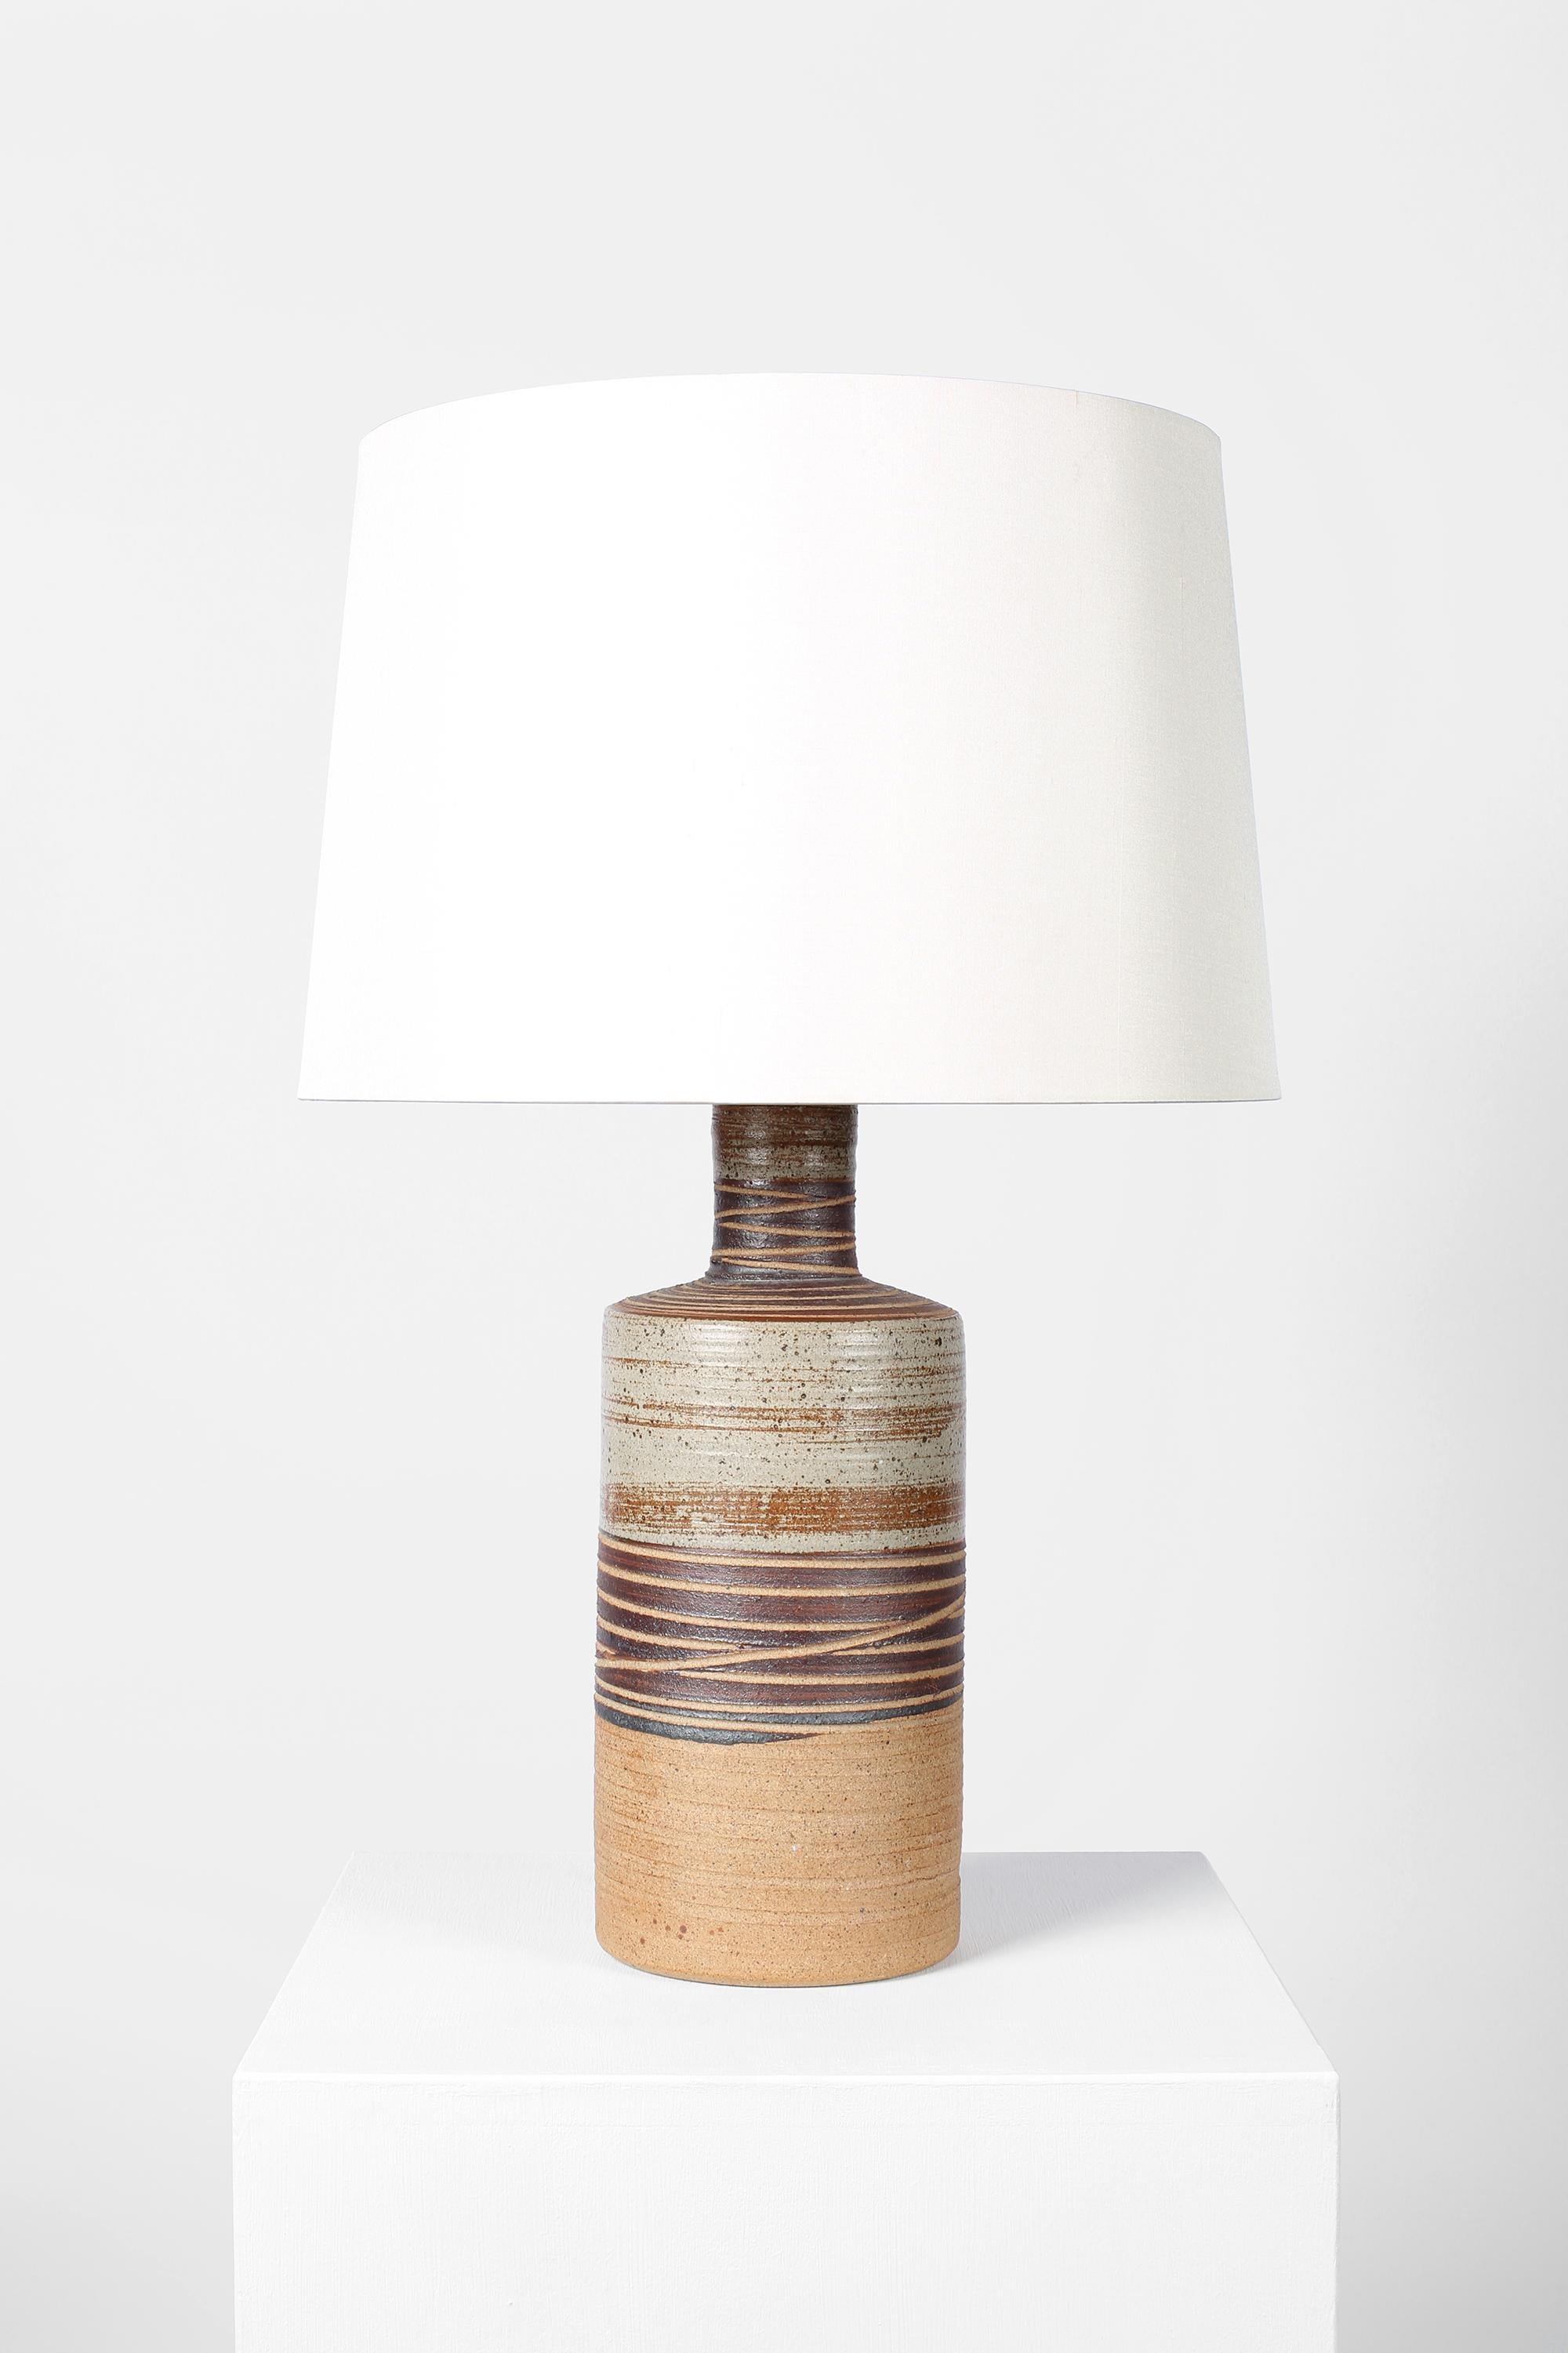 A large etched stoneware table lamp by Tue Poulsen. Danish, c. 1960s. Supplied with a tapered off-white dupion silk shade.